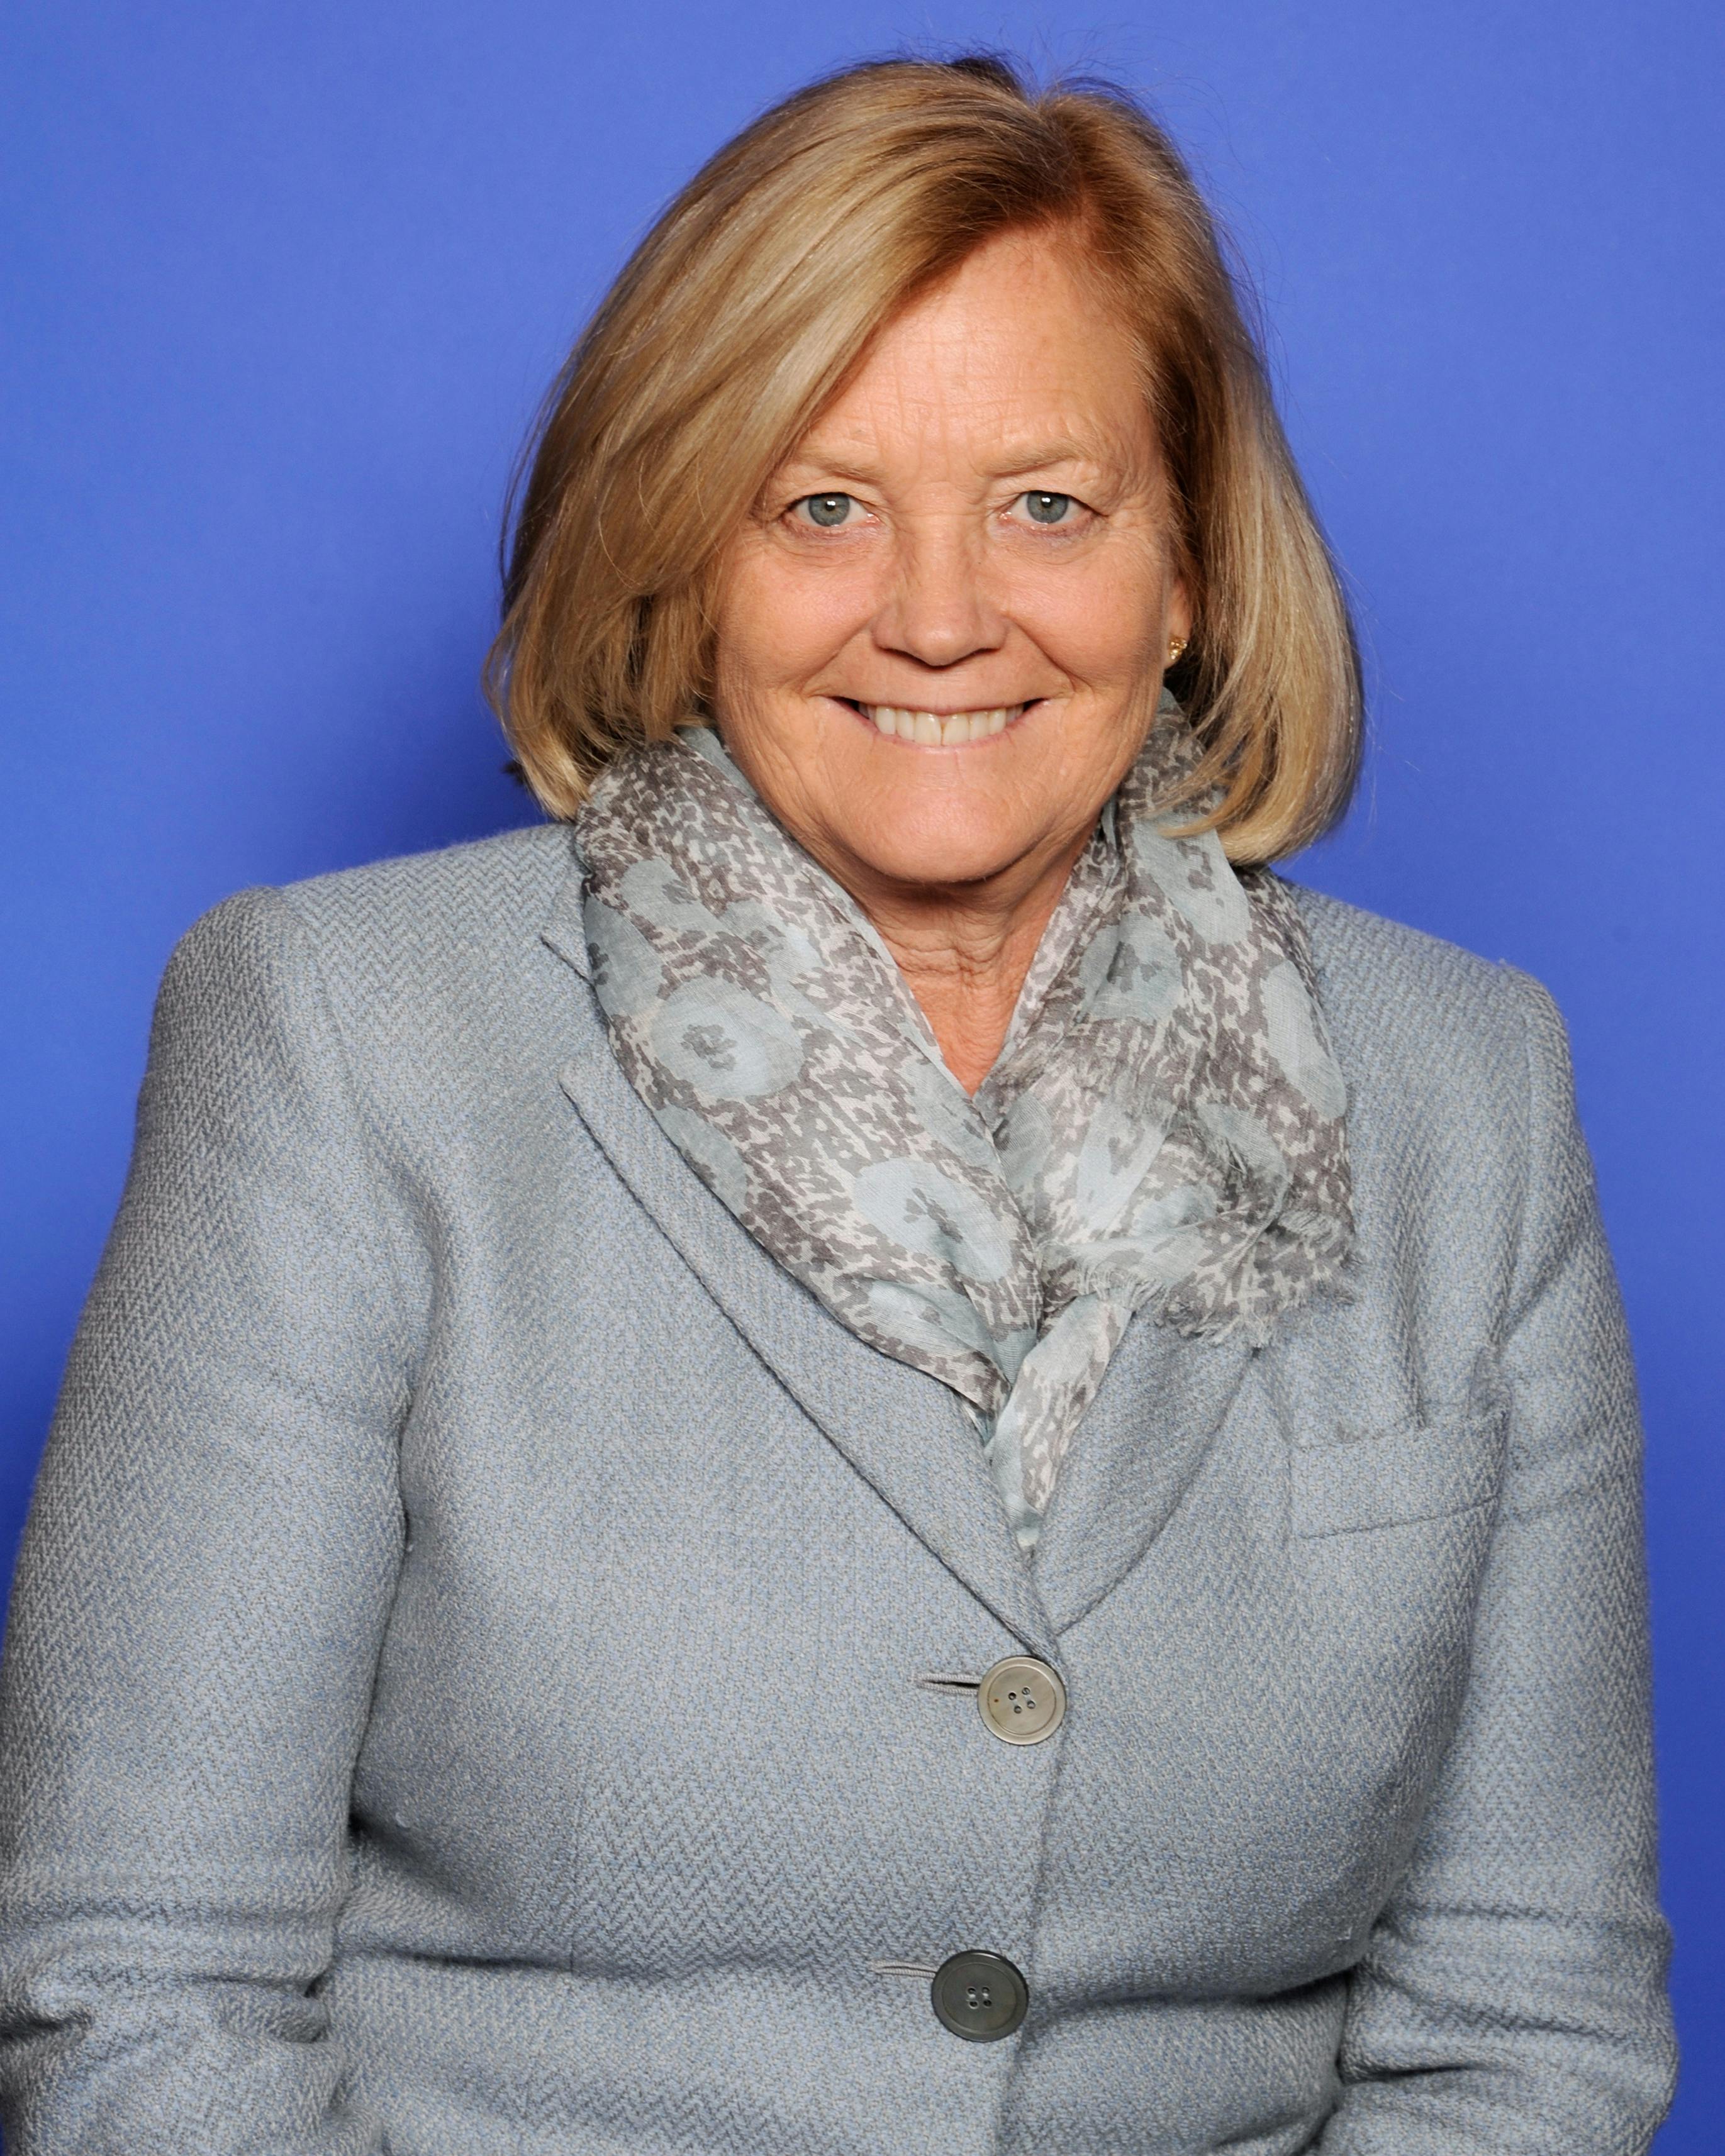 Profile picture of Chellie Pingree